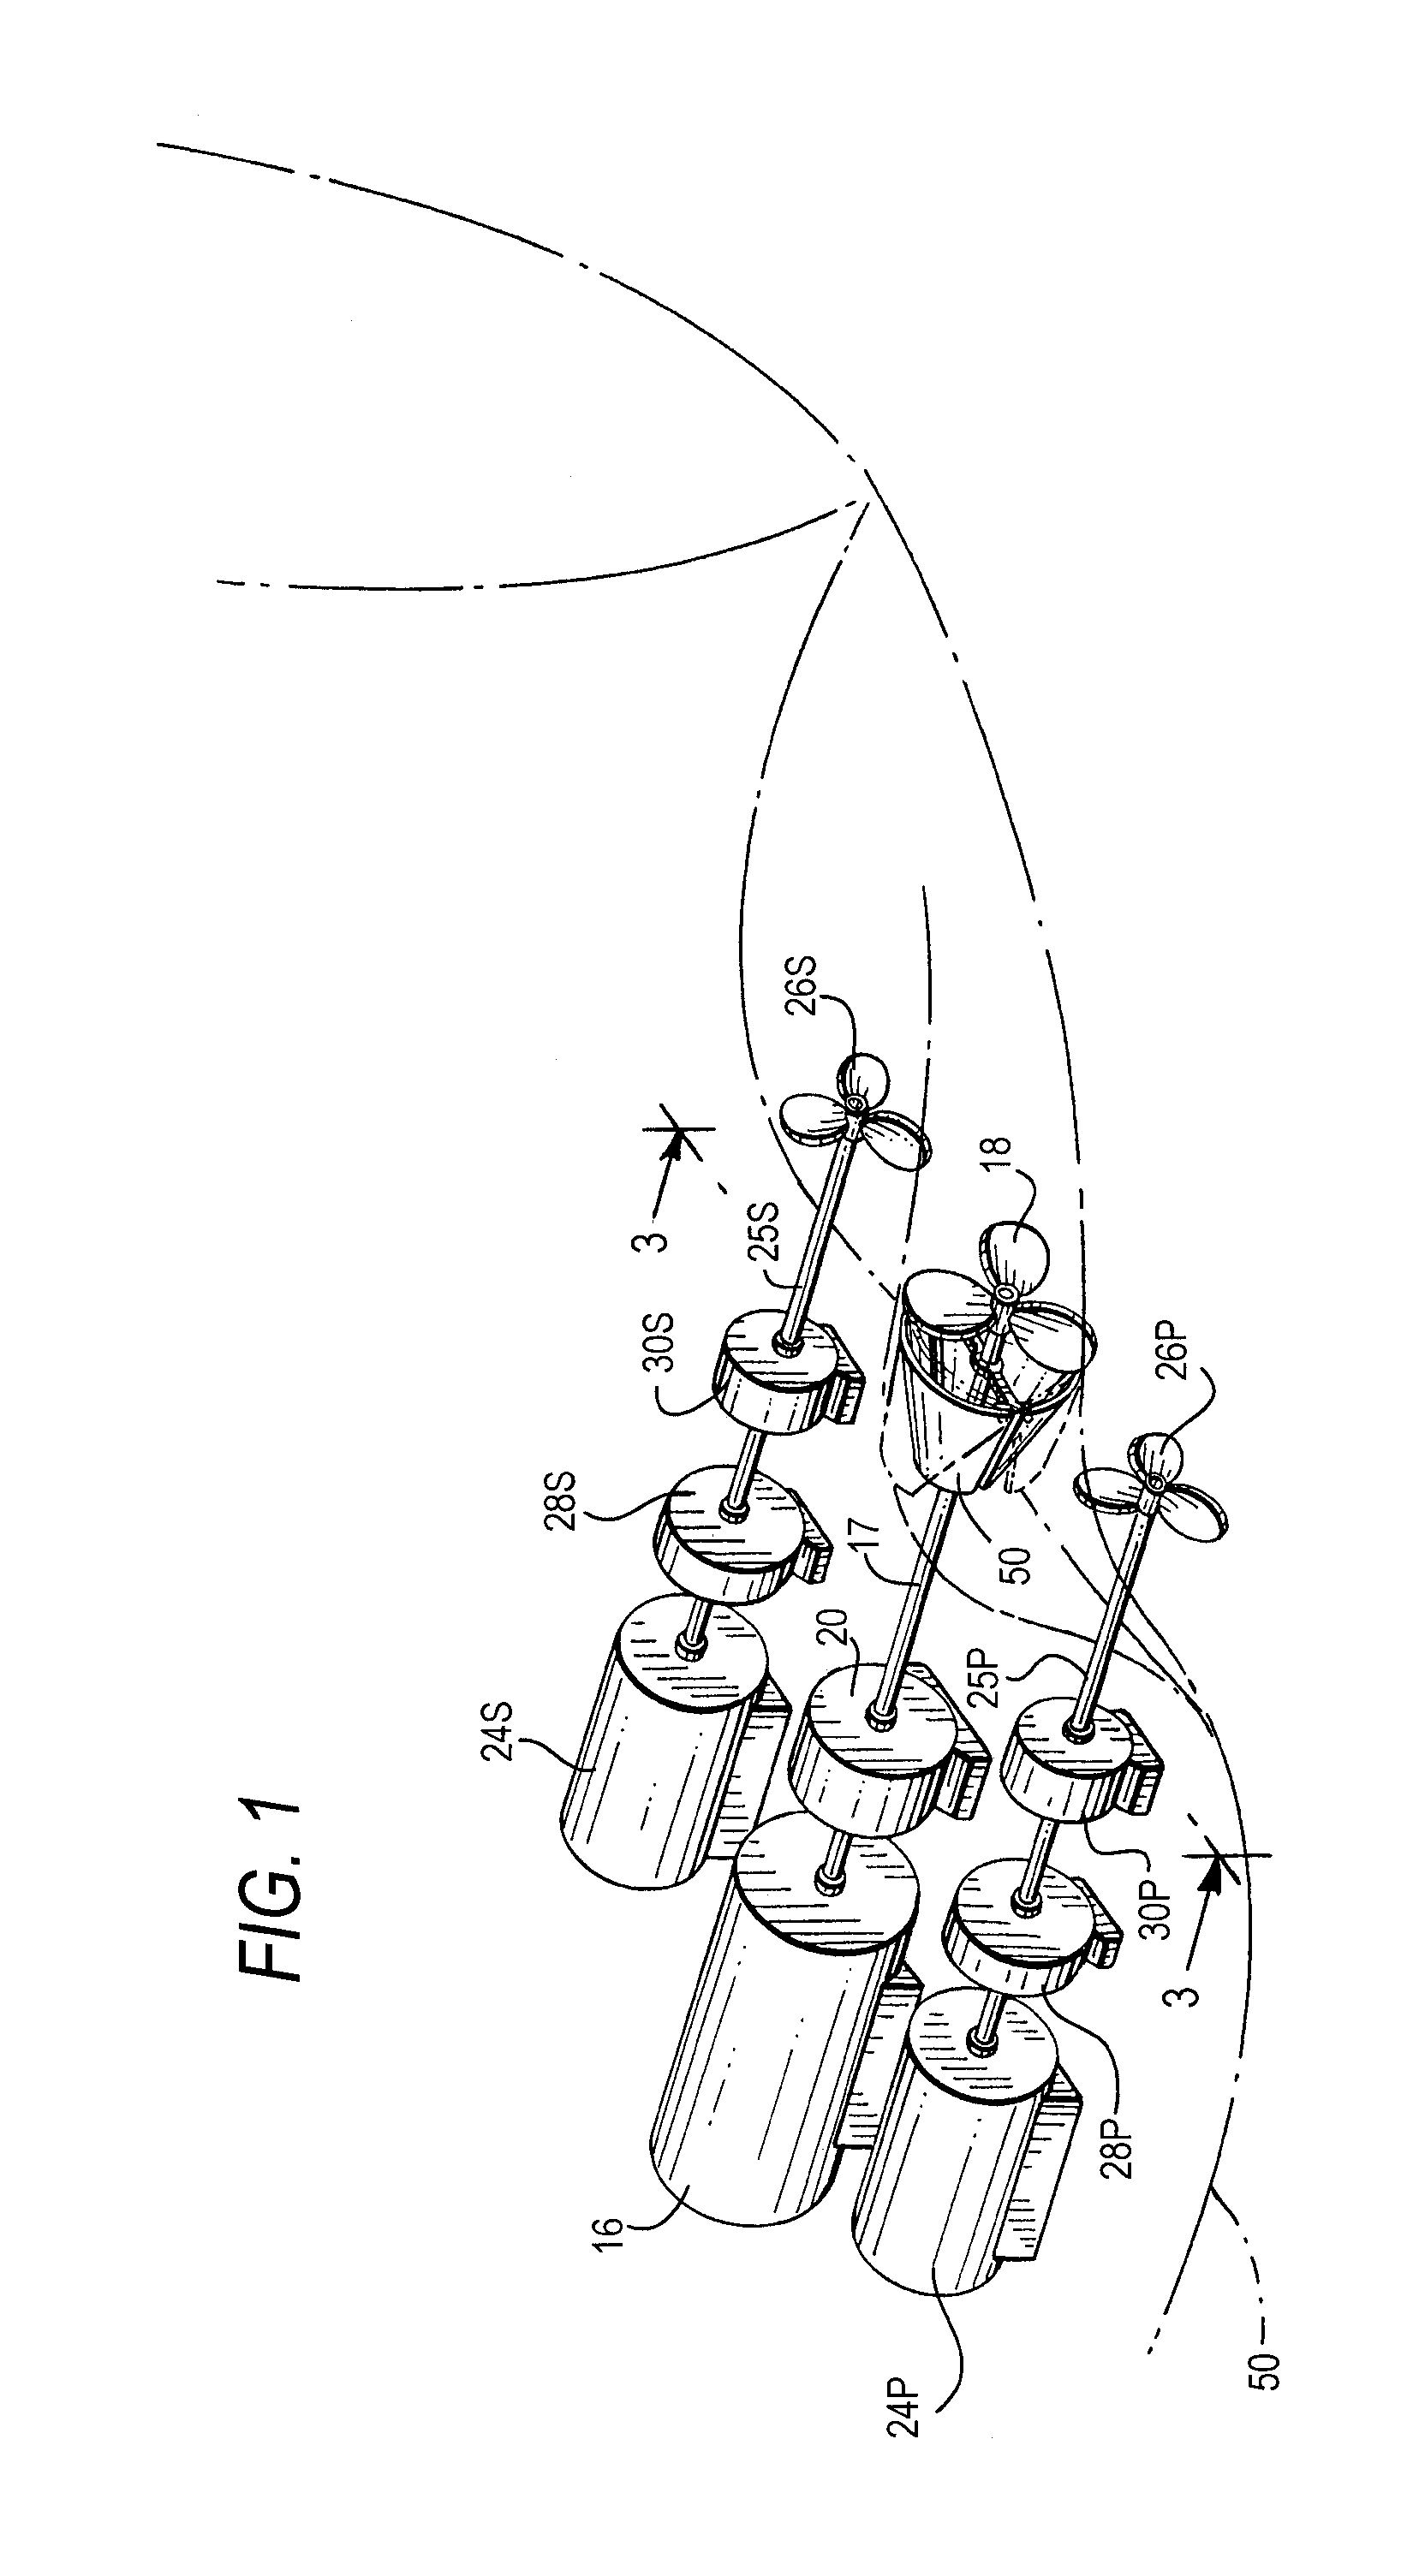 Auxiliary marine vessel propulsion system